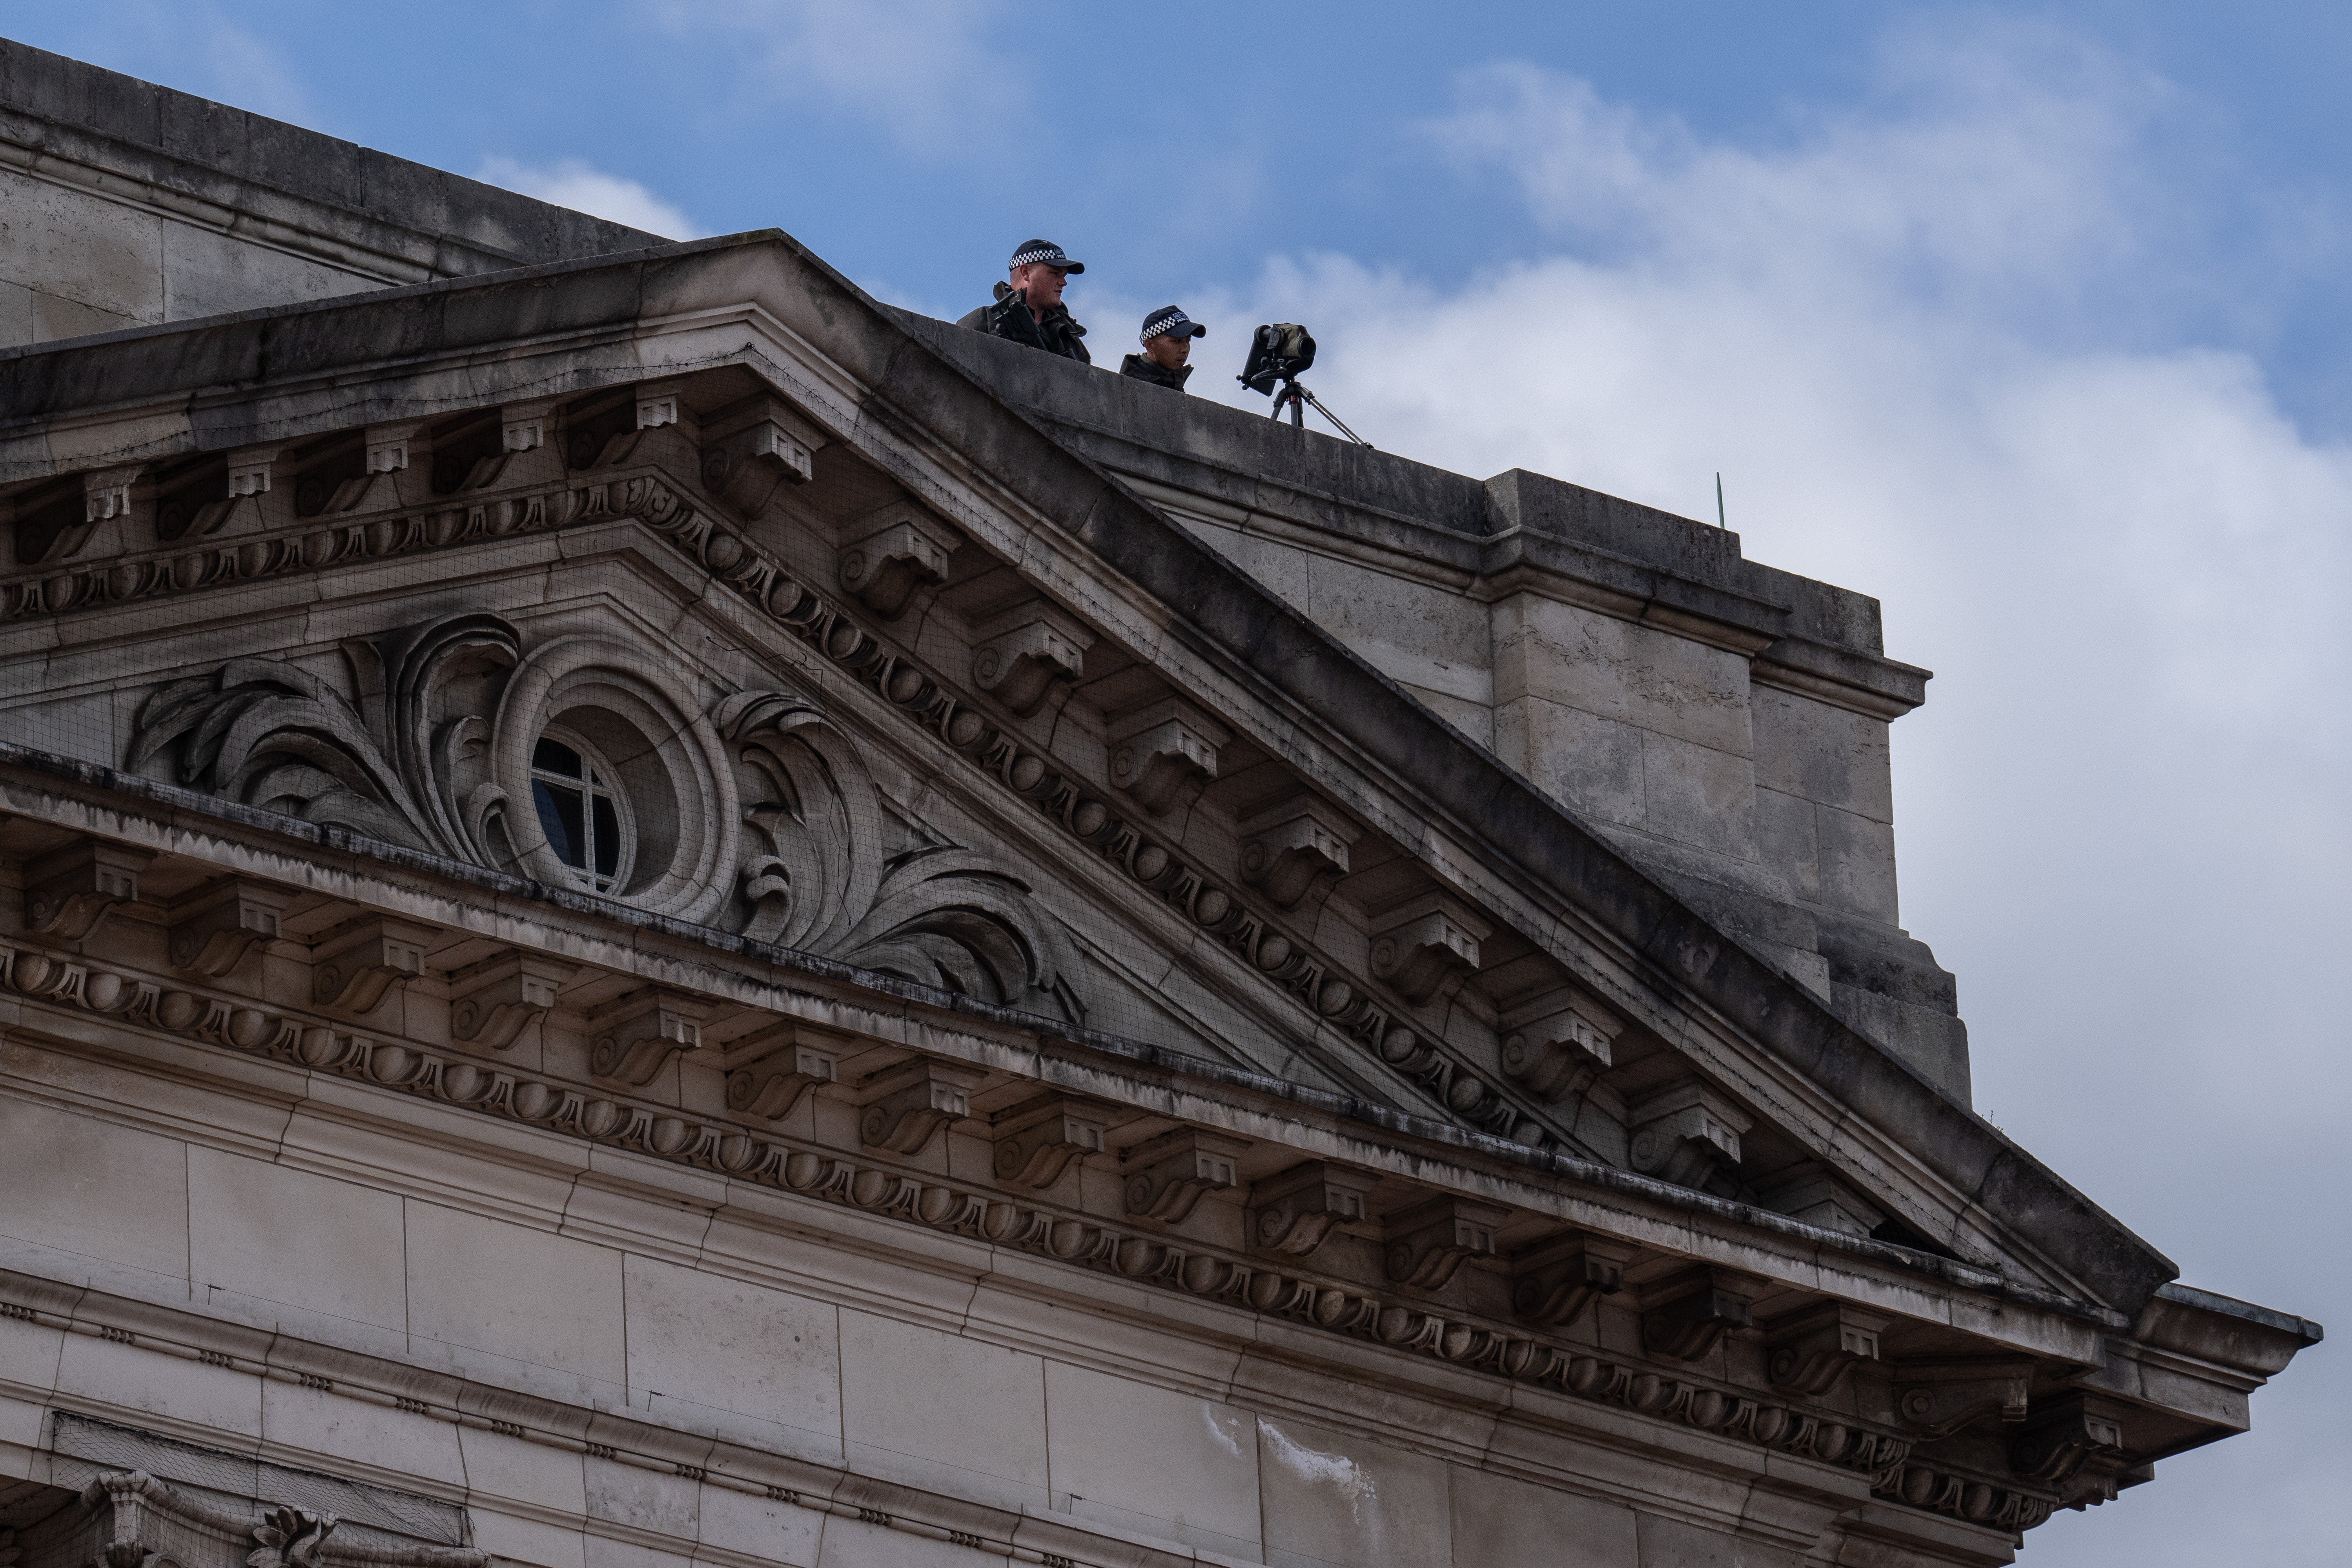 Armed police officers stand on the roof of Buckingham Palace on September 18